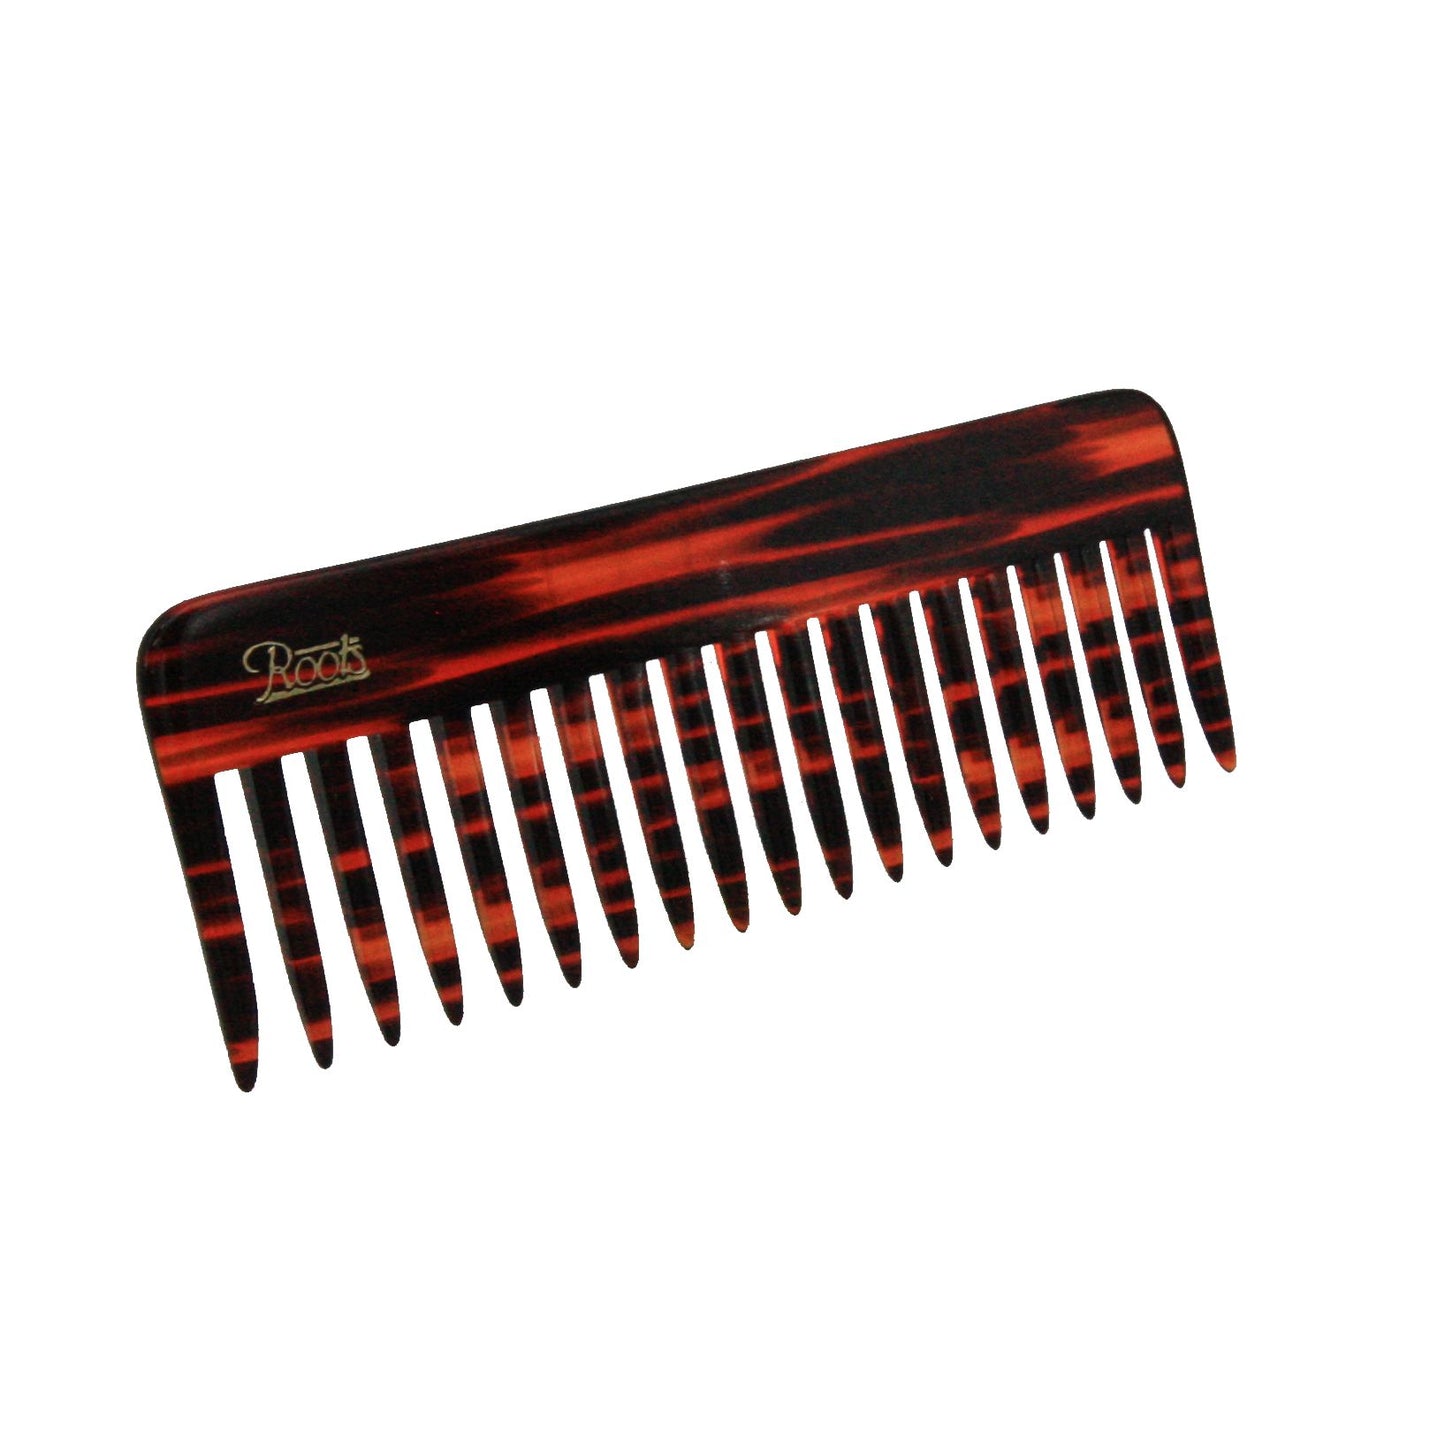 5.5in Roots Cellulose Acetate Wide Tooth Rake Comb - Clearance